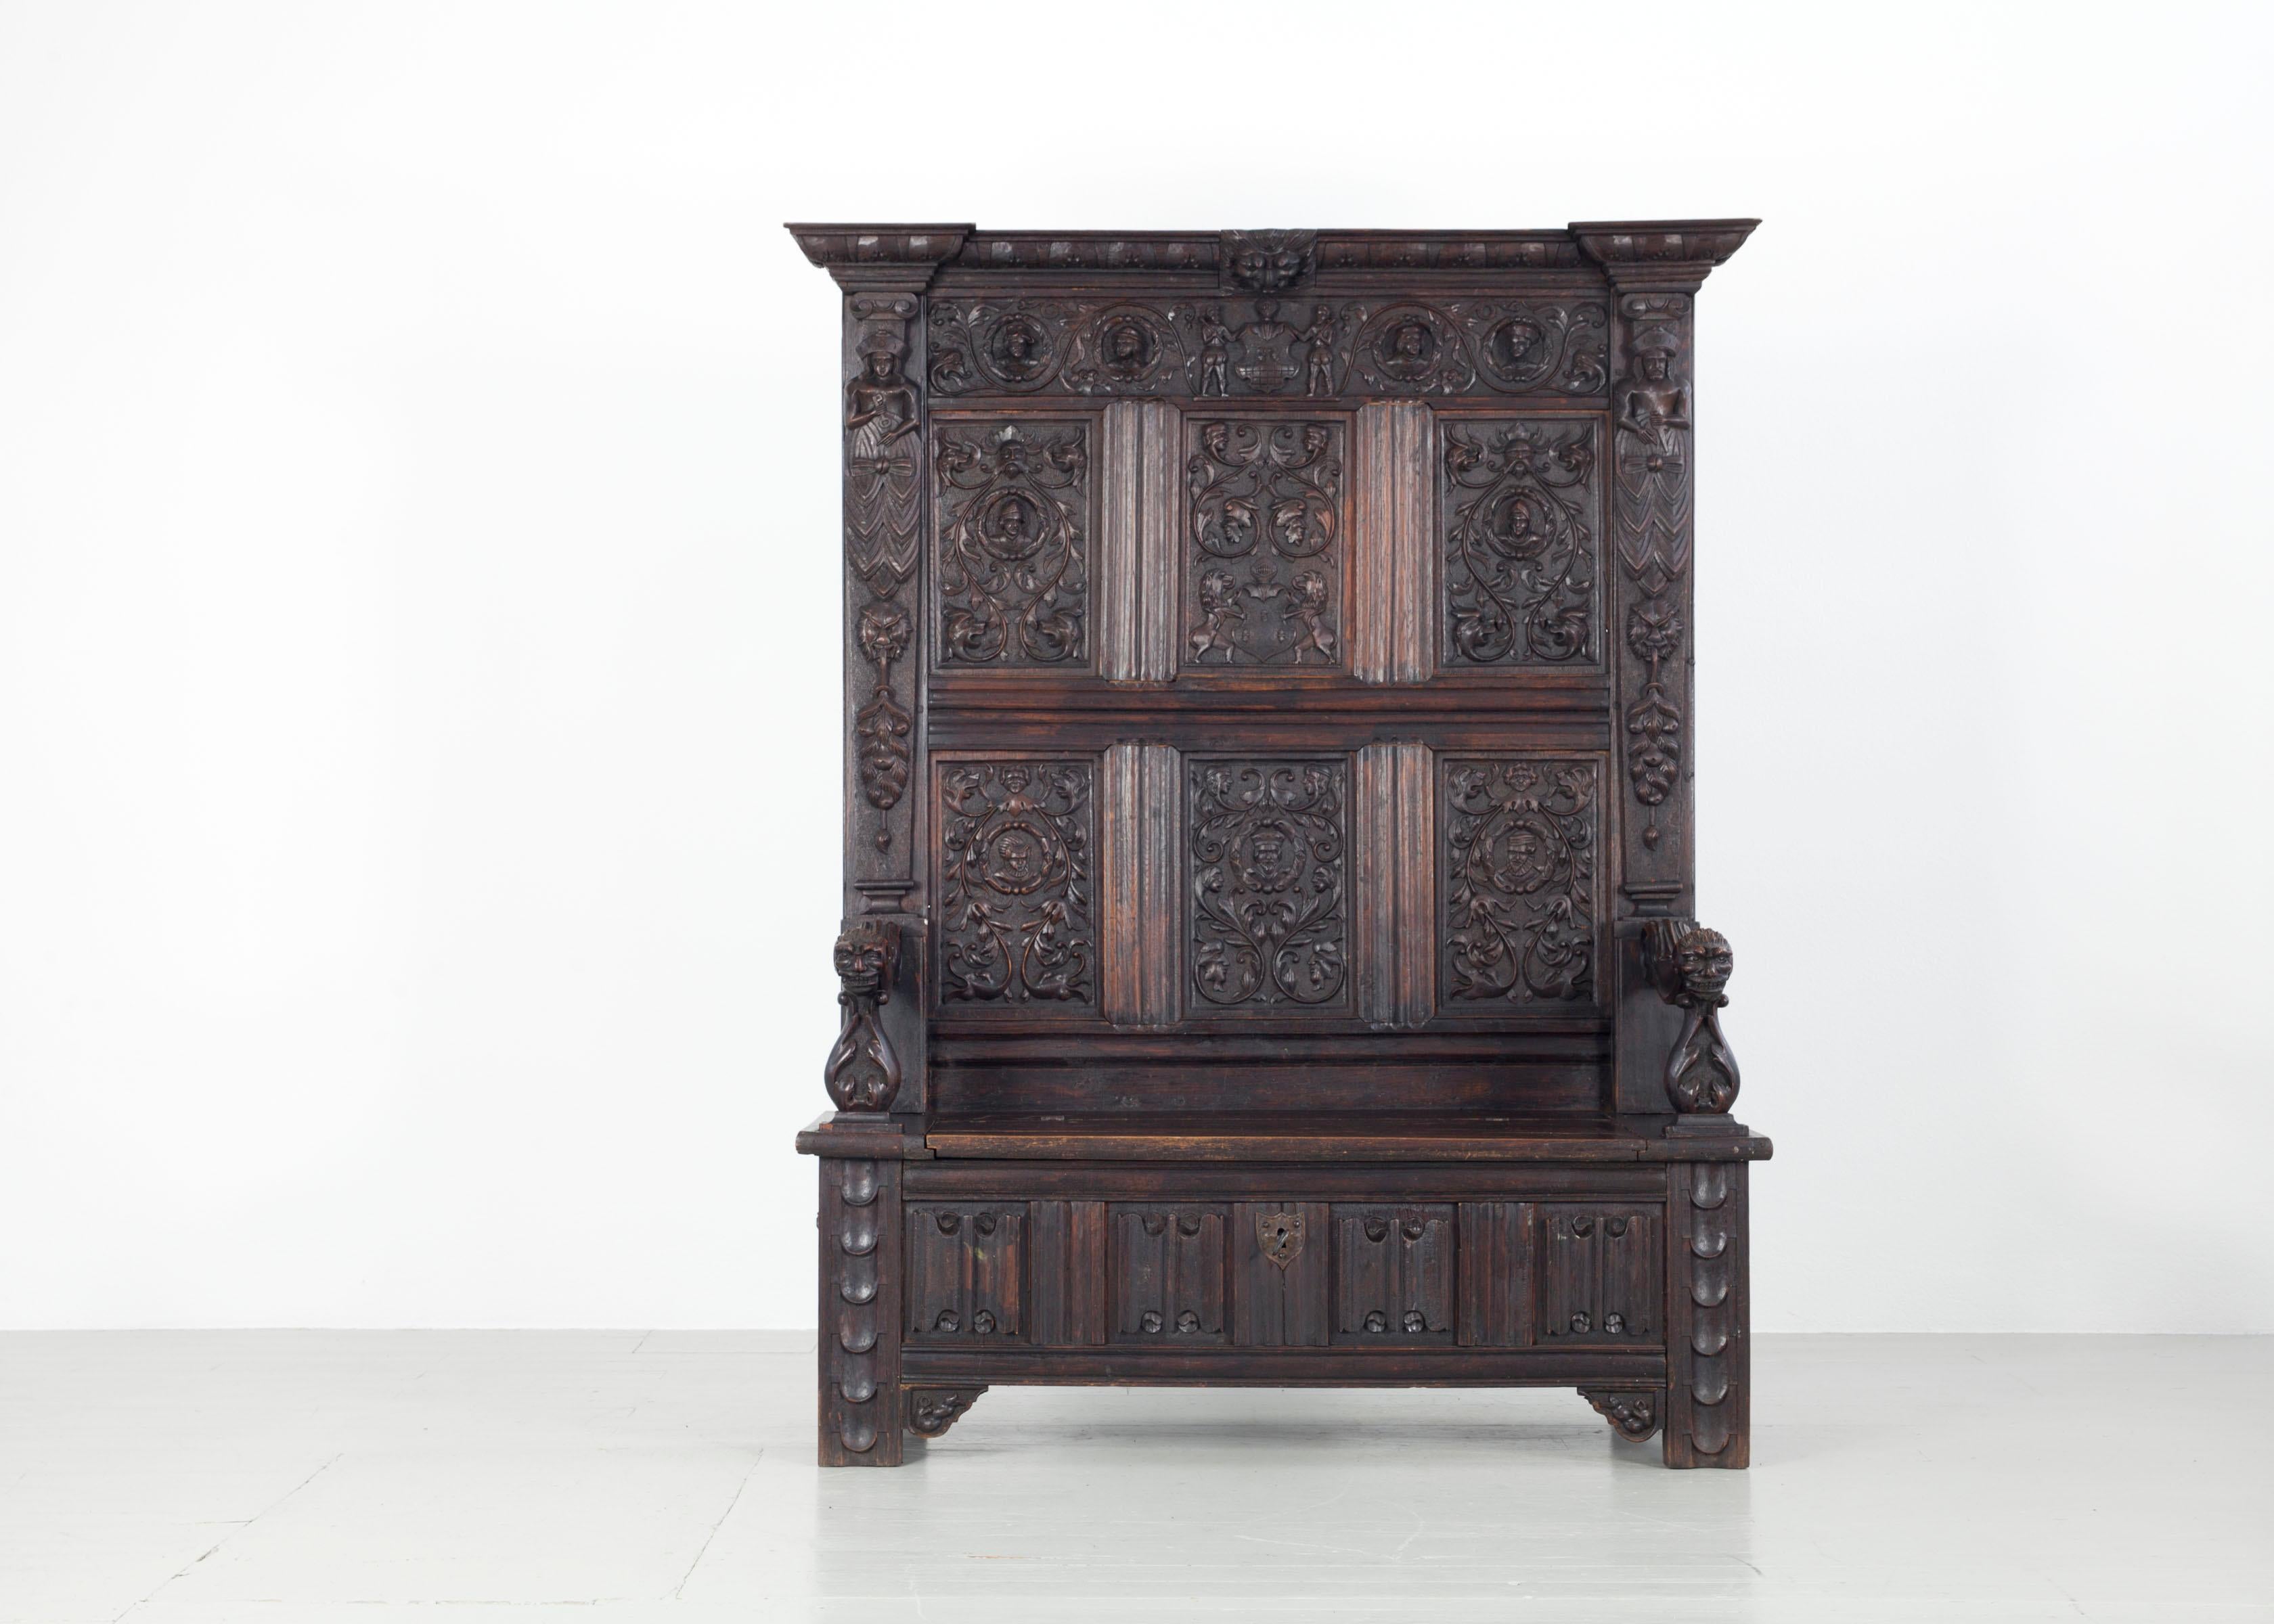 Gothic-Revival oak chest bench with carved figures and details. Germany, circa 1900.
Storage space under the bench.